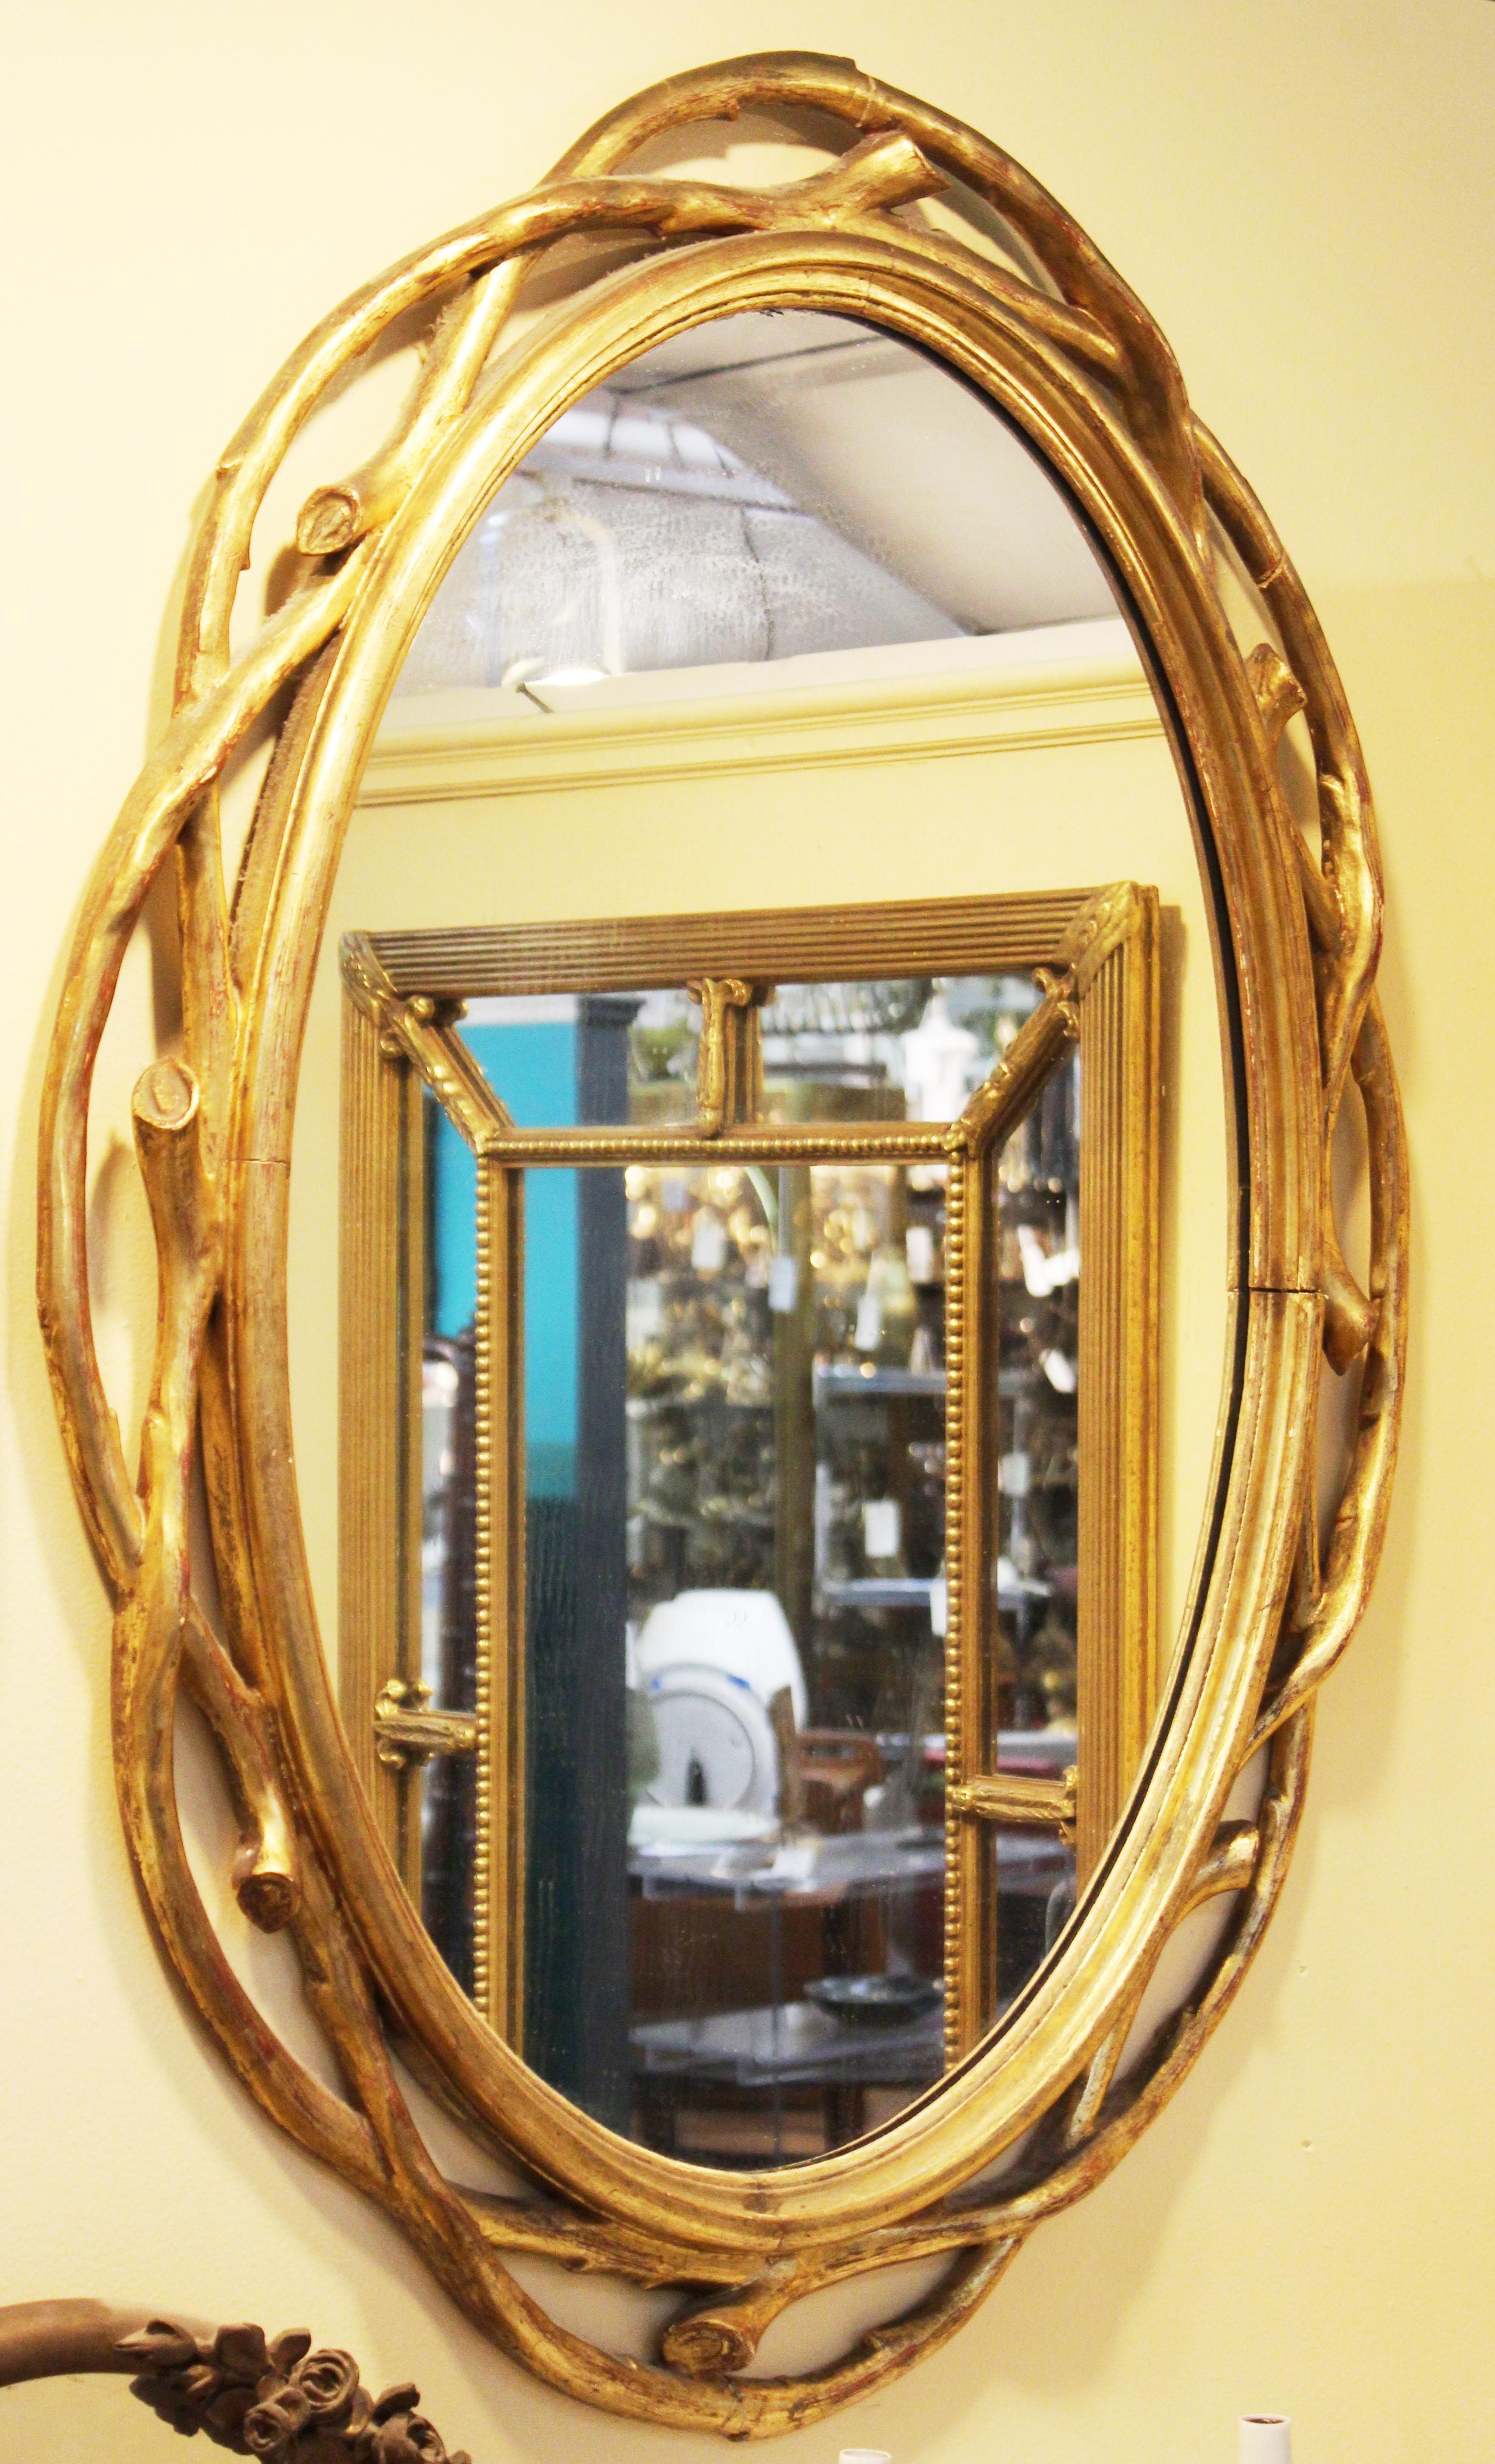 Hollywood Regency pair of large oval mirrors with carved giltwood frames in the shape of wreaths of wooden branches. The pair is in great vintage condition with age-appropriate wear and use and some age-related minor cracks to the frames.